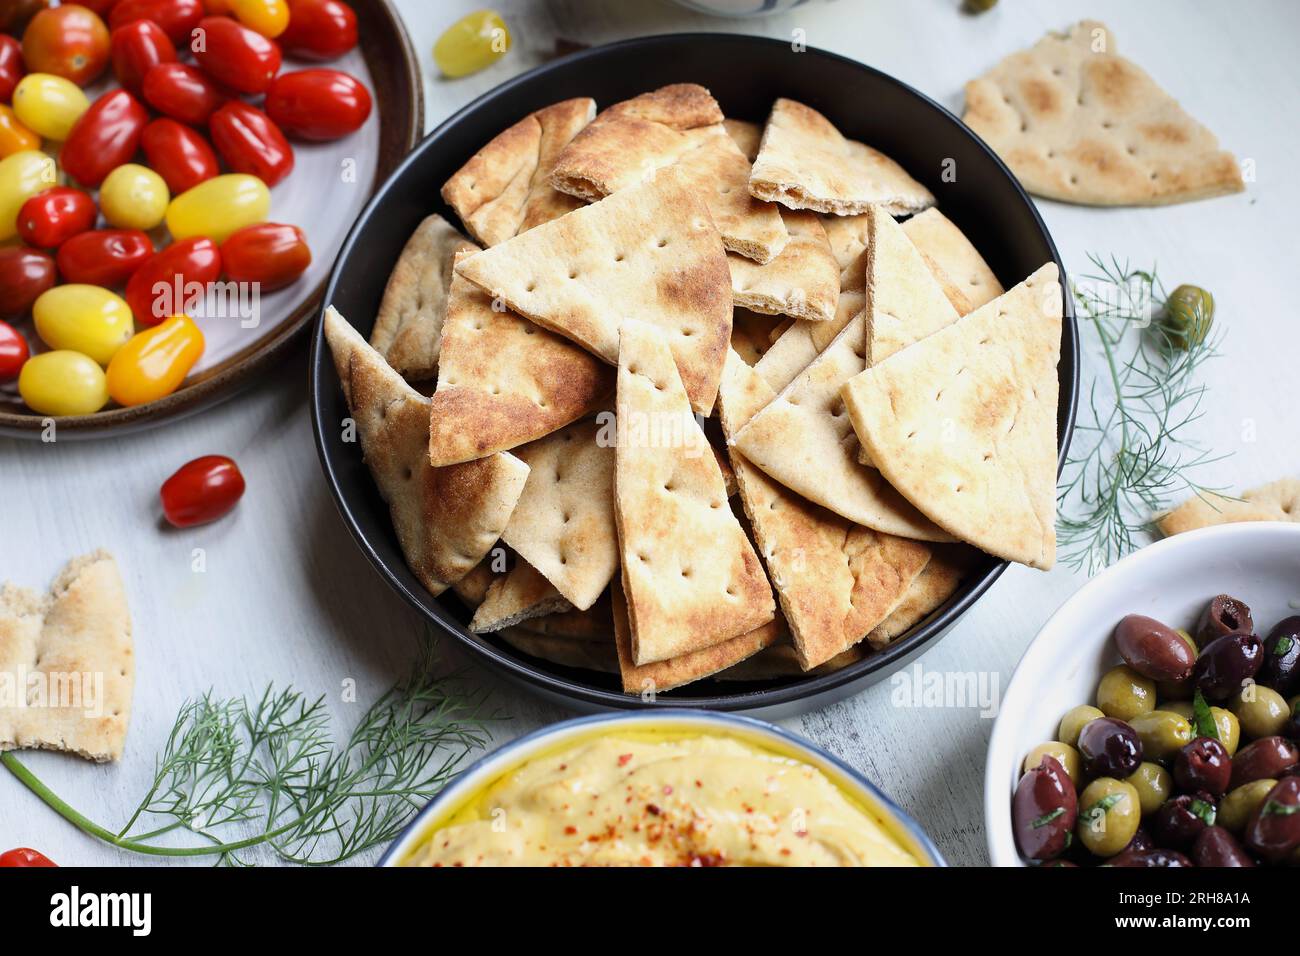 Mezze platter of pita bread surrounded by fresh tomatoes, olives and hummus over a white rustic table. Overhead view. Stock Photo